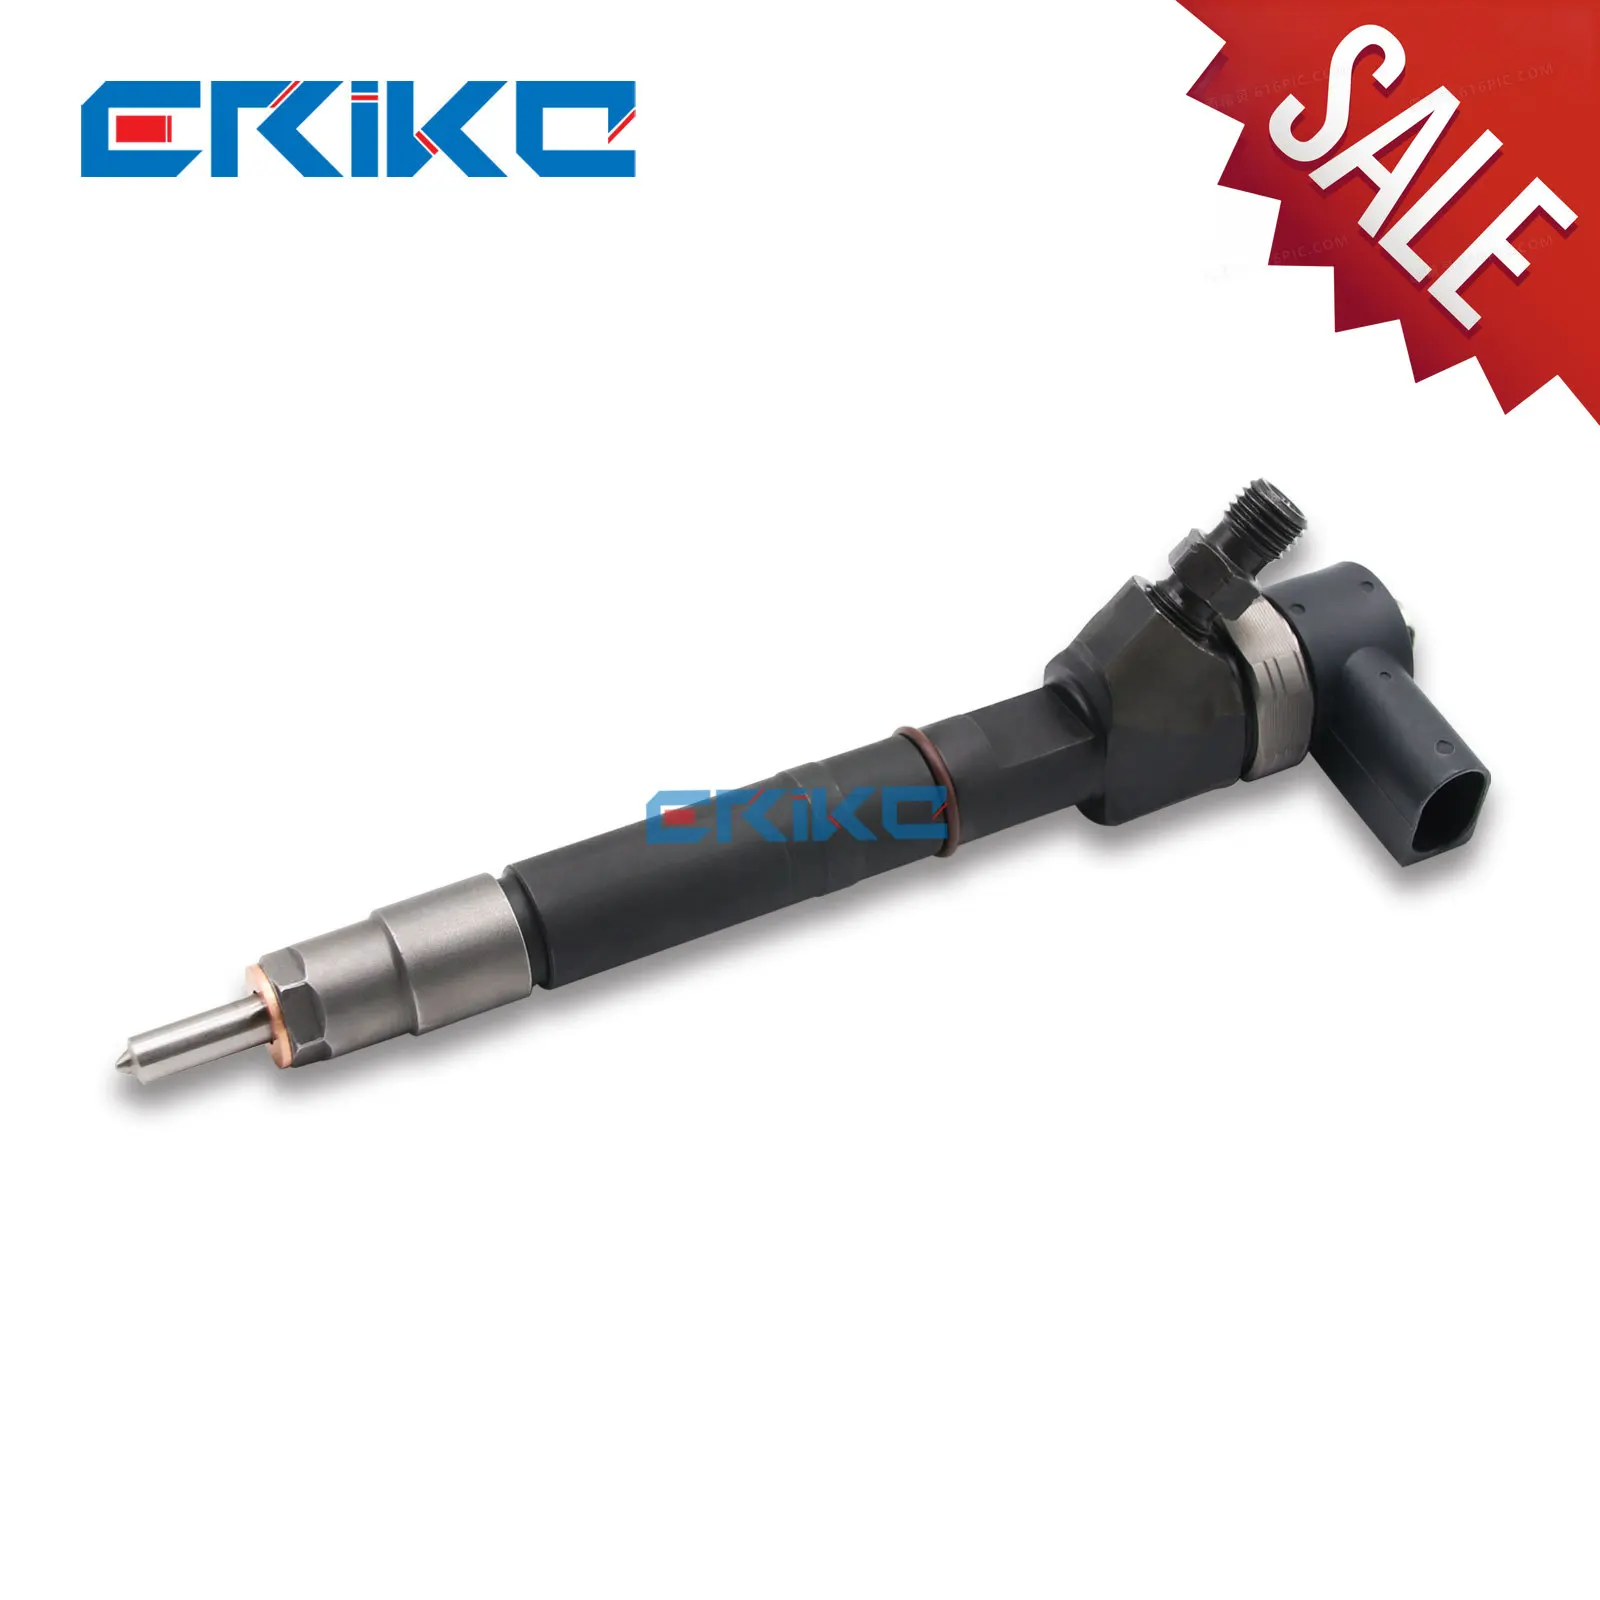 

0445110055 0986435133 OM646 Common Rail Sprayer Injector A6110701187 Diesel Inyector Nozzle for Bosch Mercedes-Benz